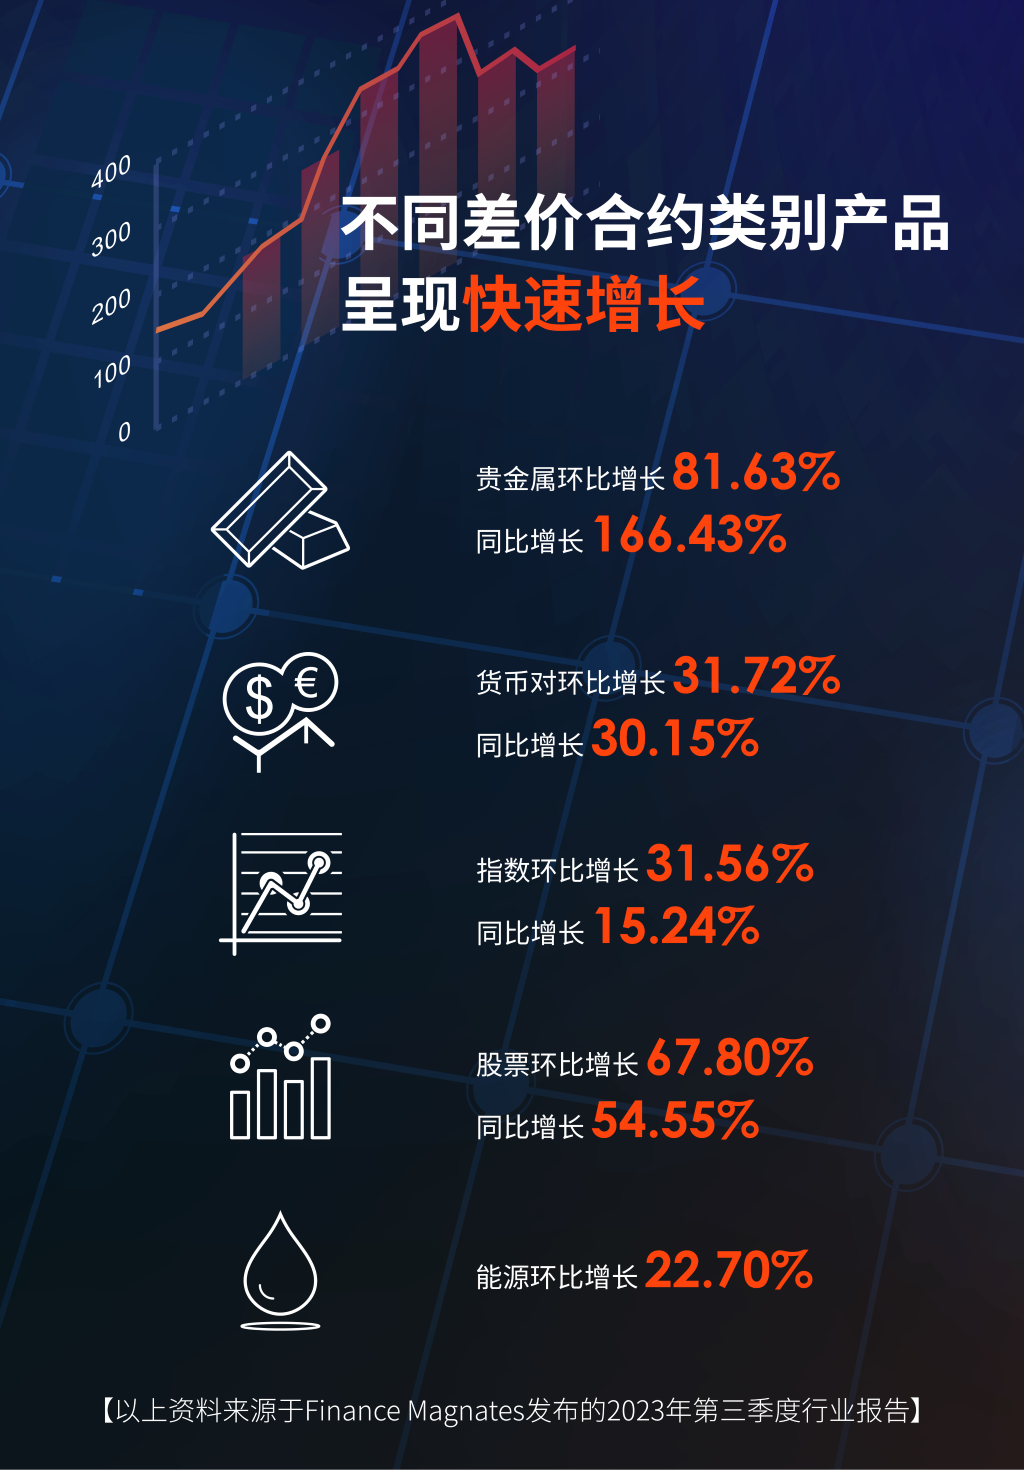 Fourth in the world!ATFXTrading volume exceeded in the third quarter8523Billion US dollars, leading the global market by a wide margin927 / author:atfx2019 / PostsID:1726995